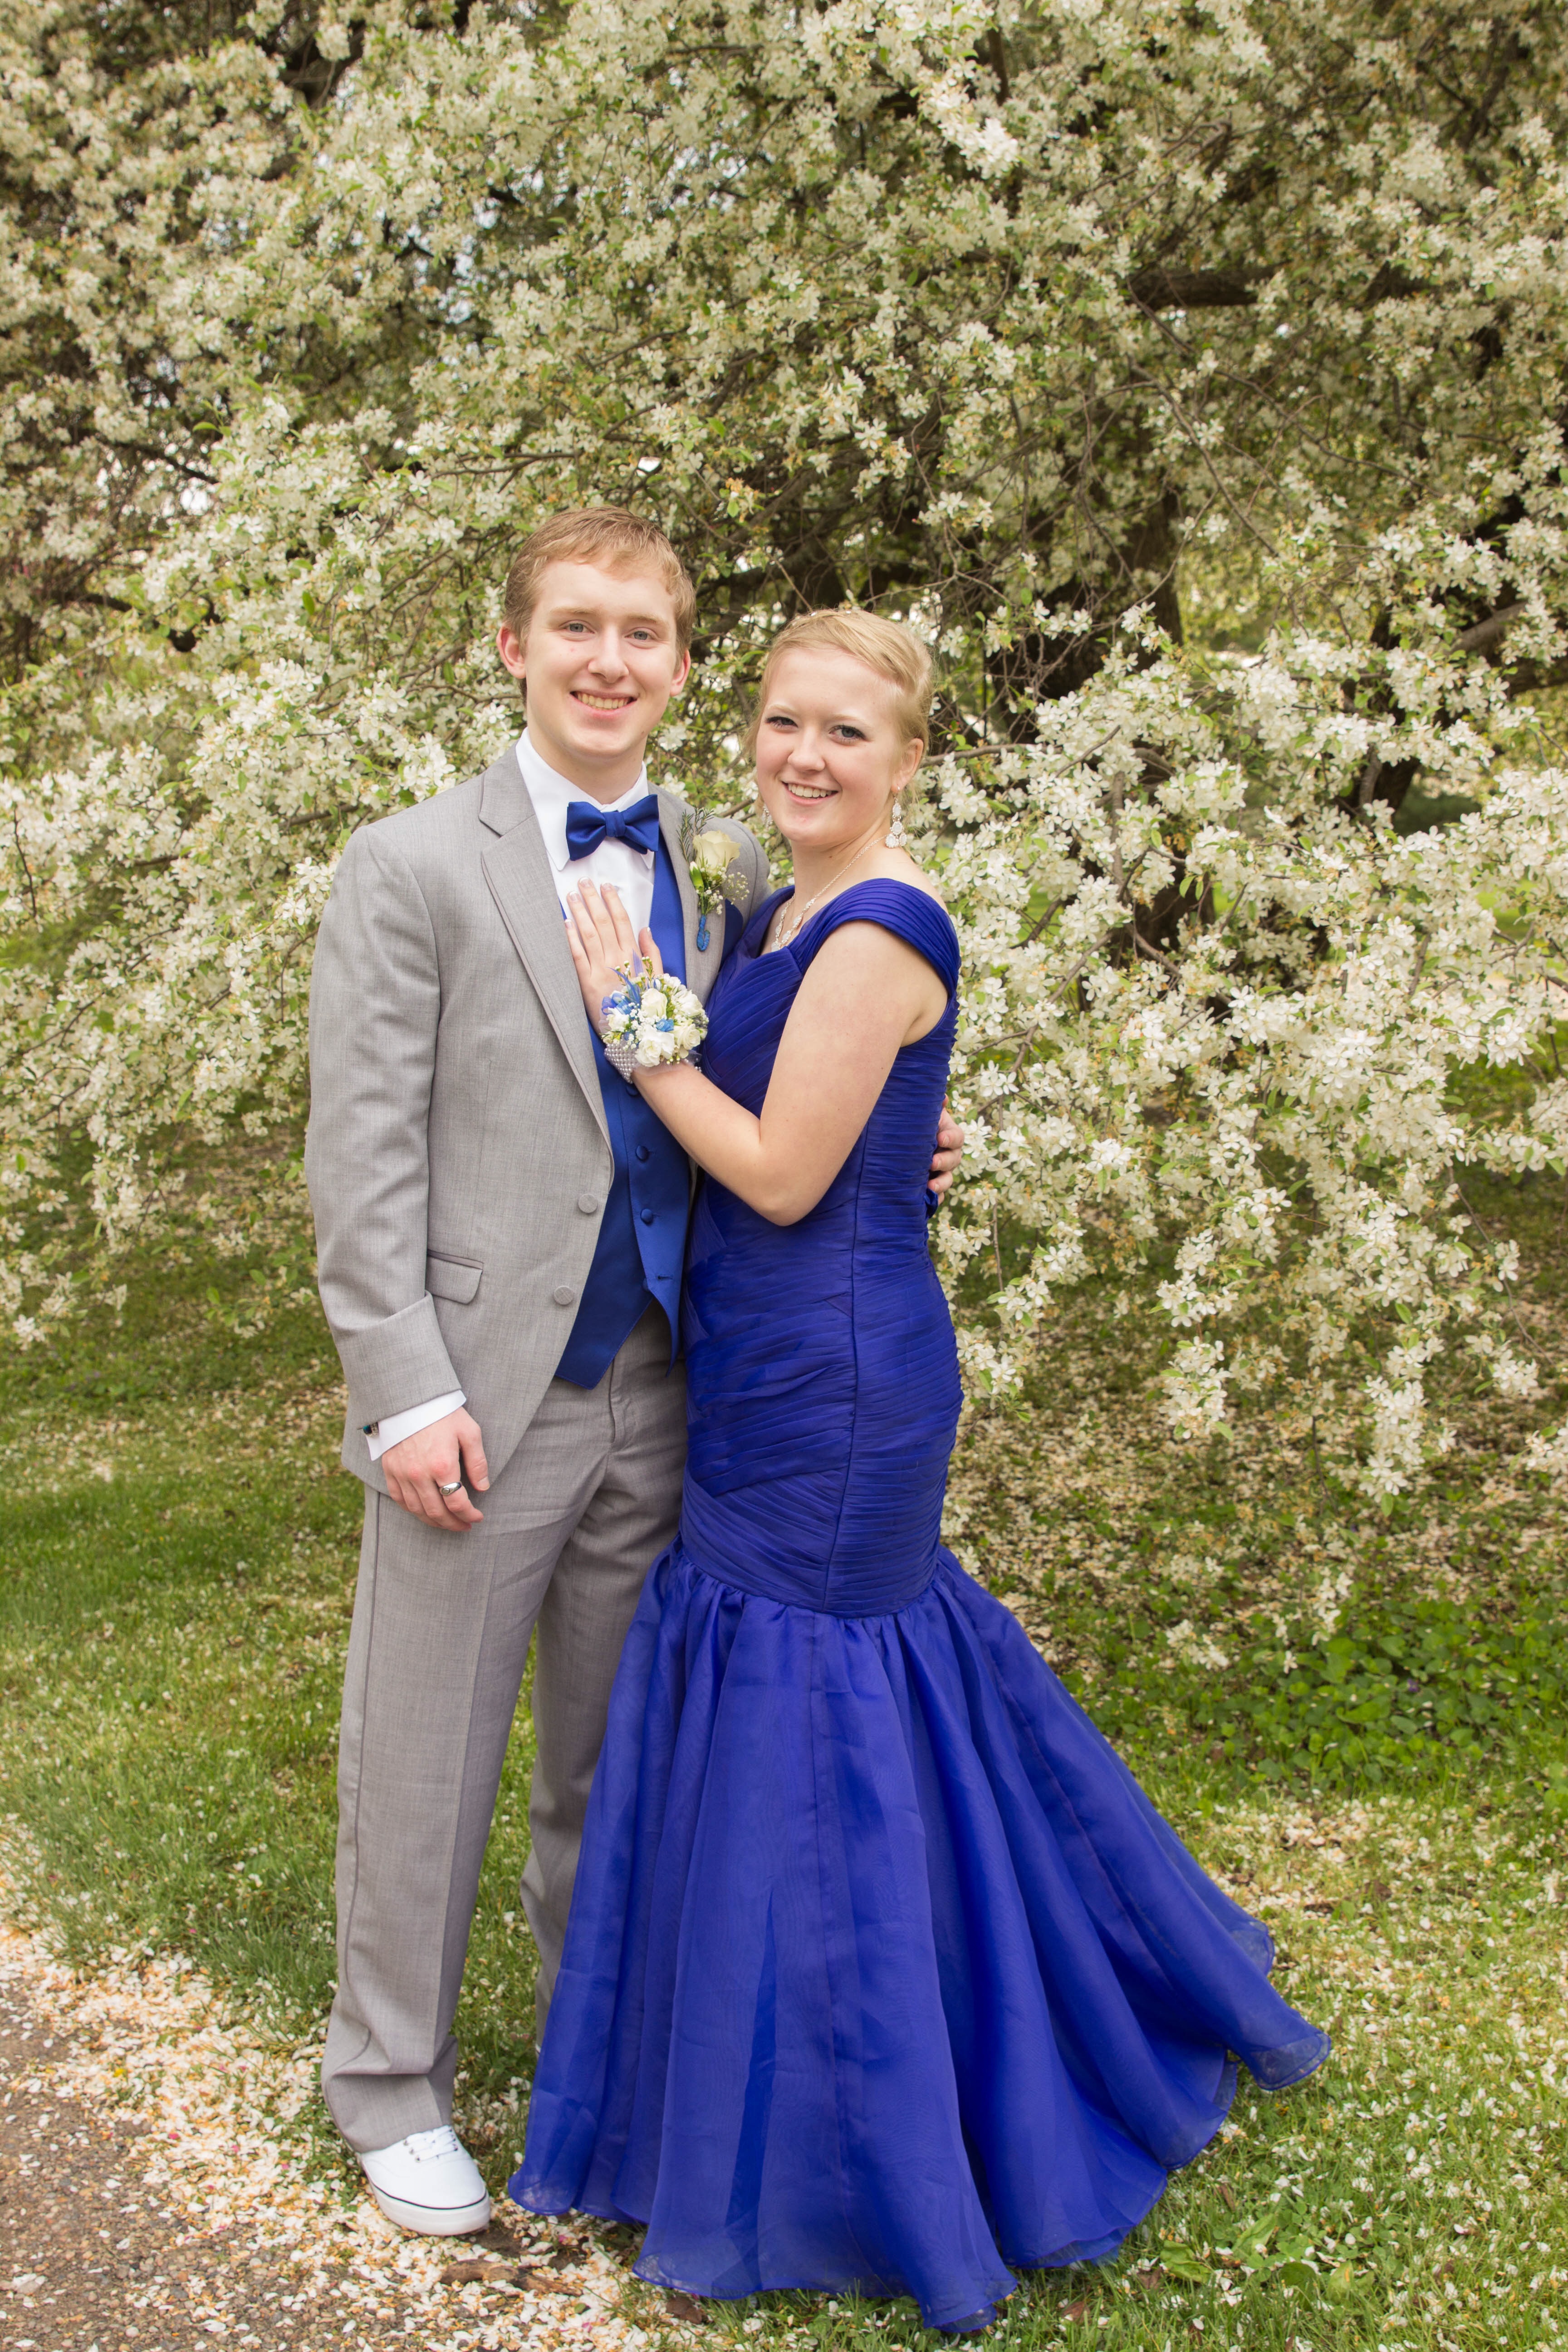 A Gallery of Our 2015 Custom Prom Dresses